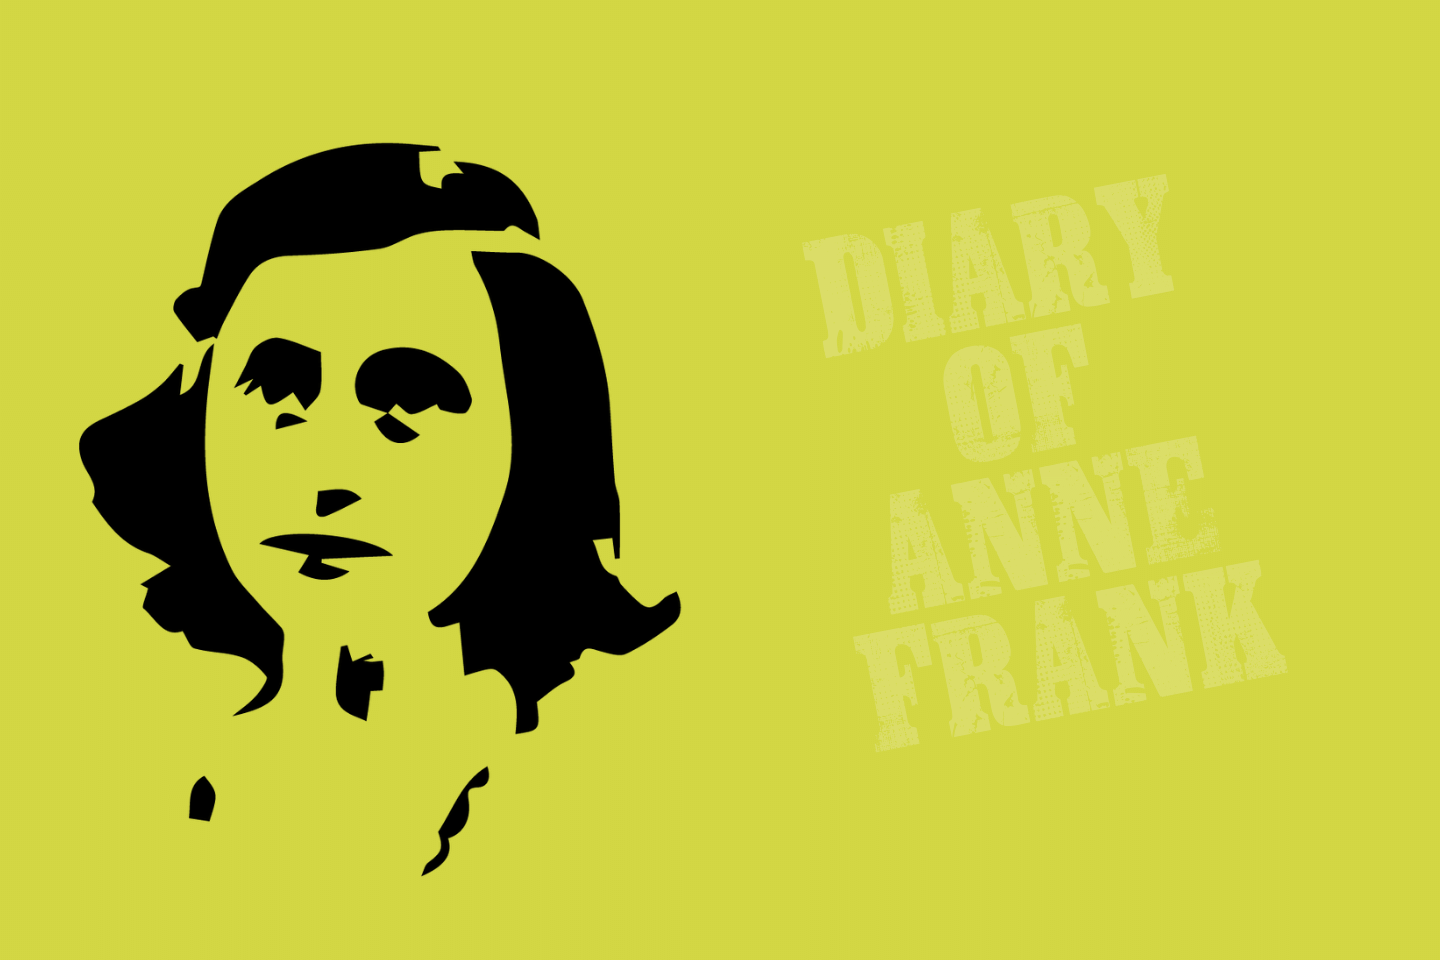 Midland University Presents The Diary of Anne Frank